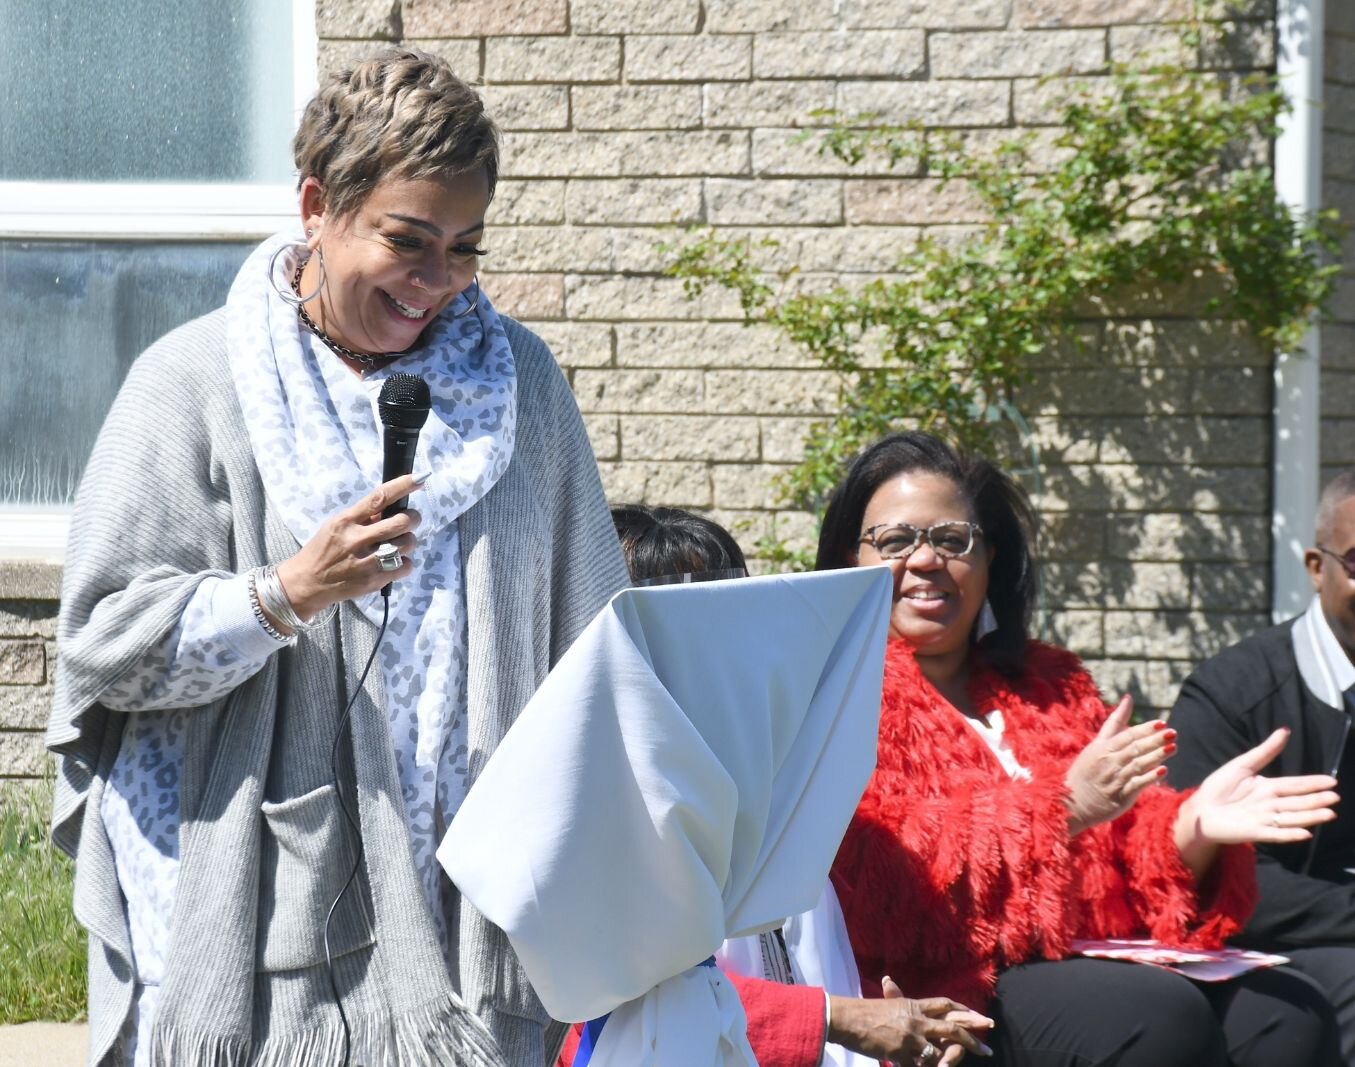 Carla Reynolds, Battle Creek City Commissioner, gives remarks on May 8, during the day of the unveiling of Honorary Mayor Maude Bristol-Perry Avenue.